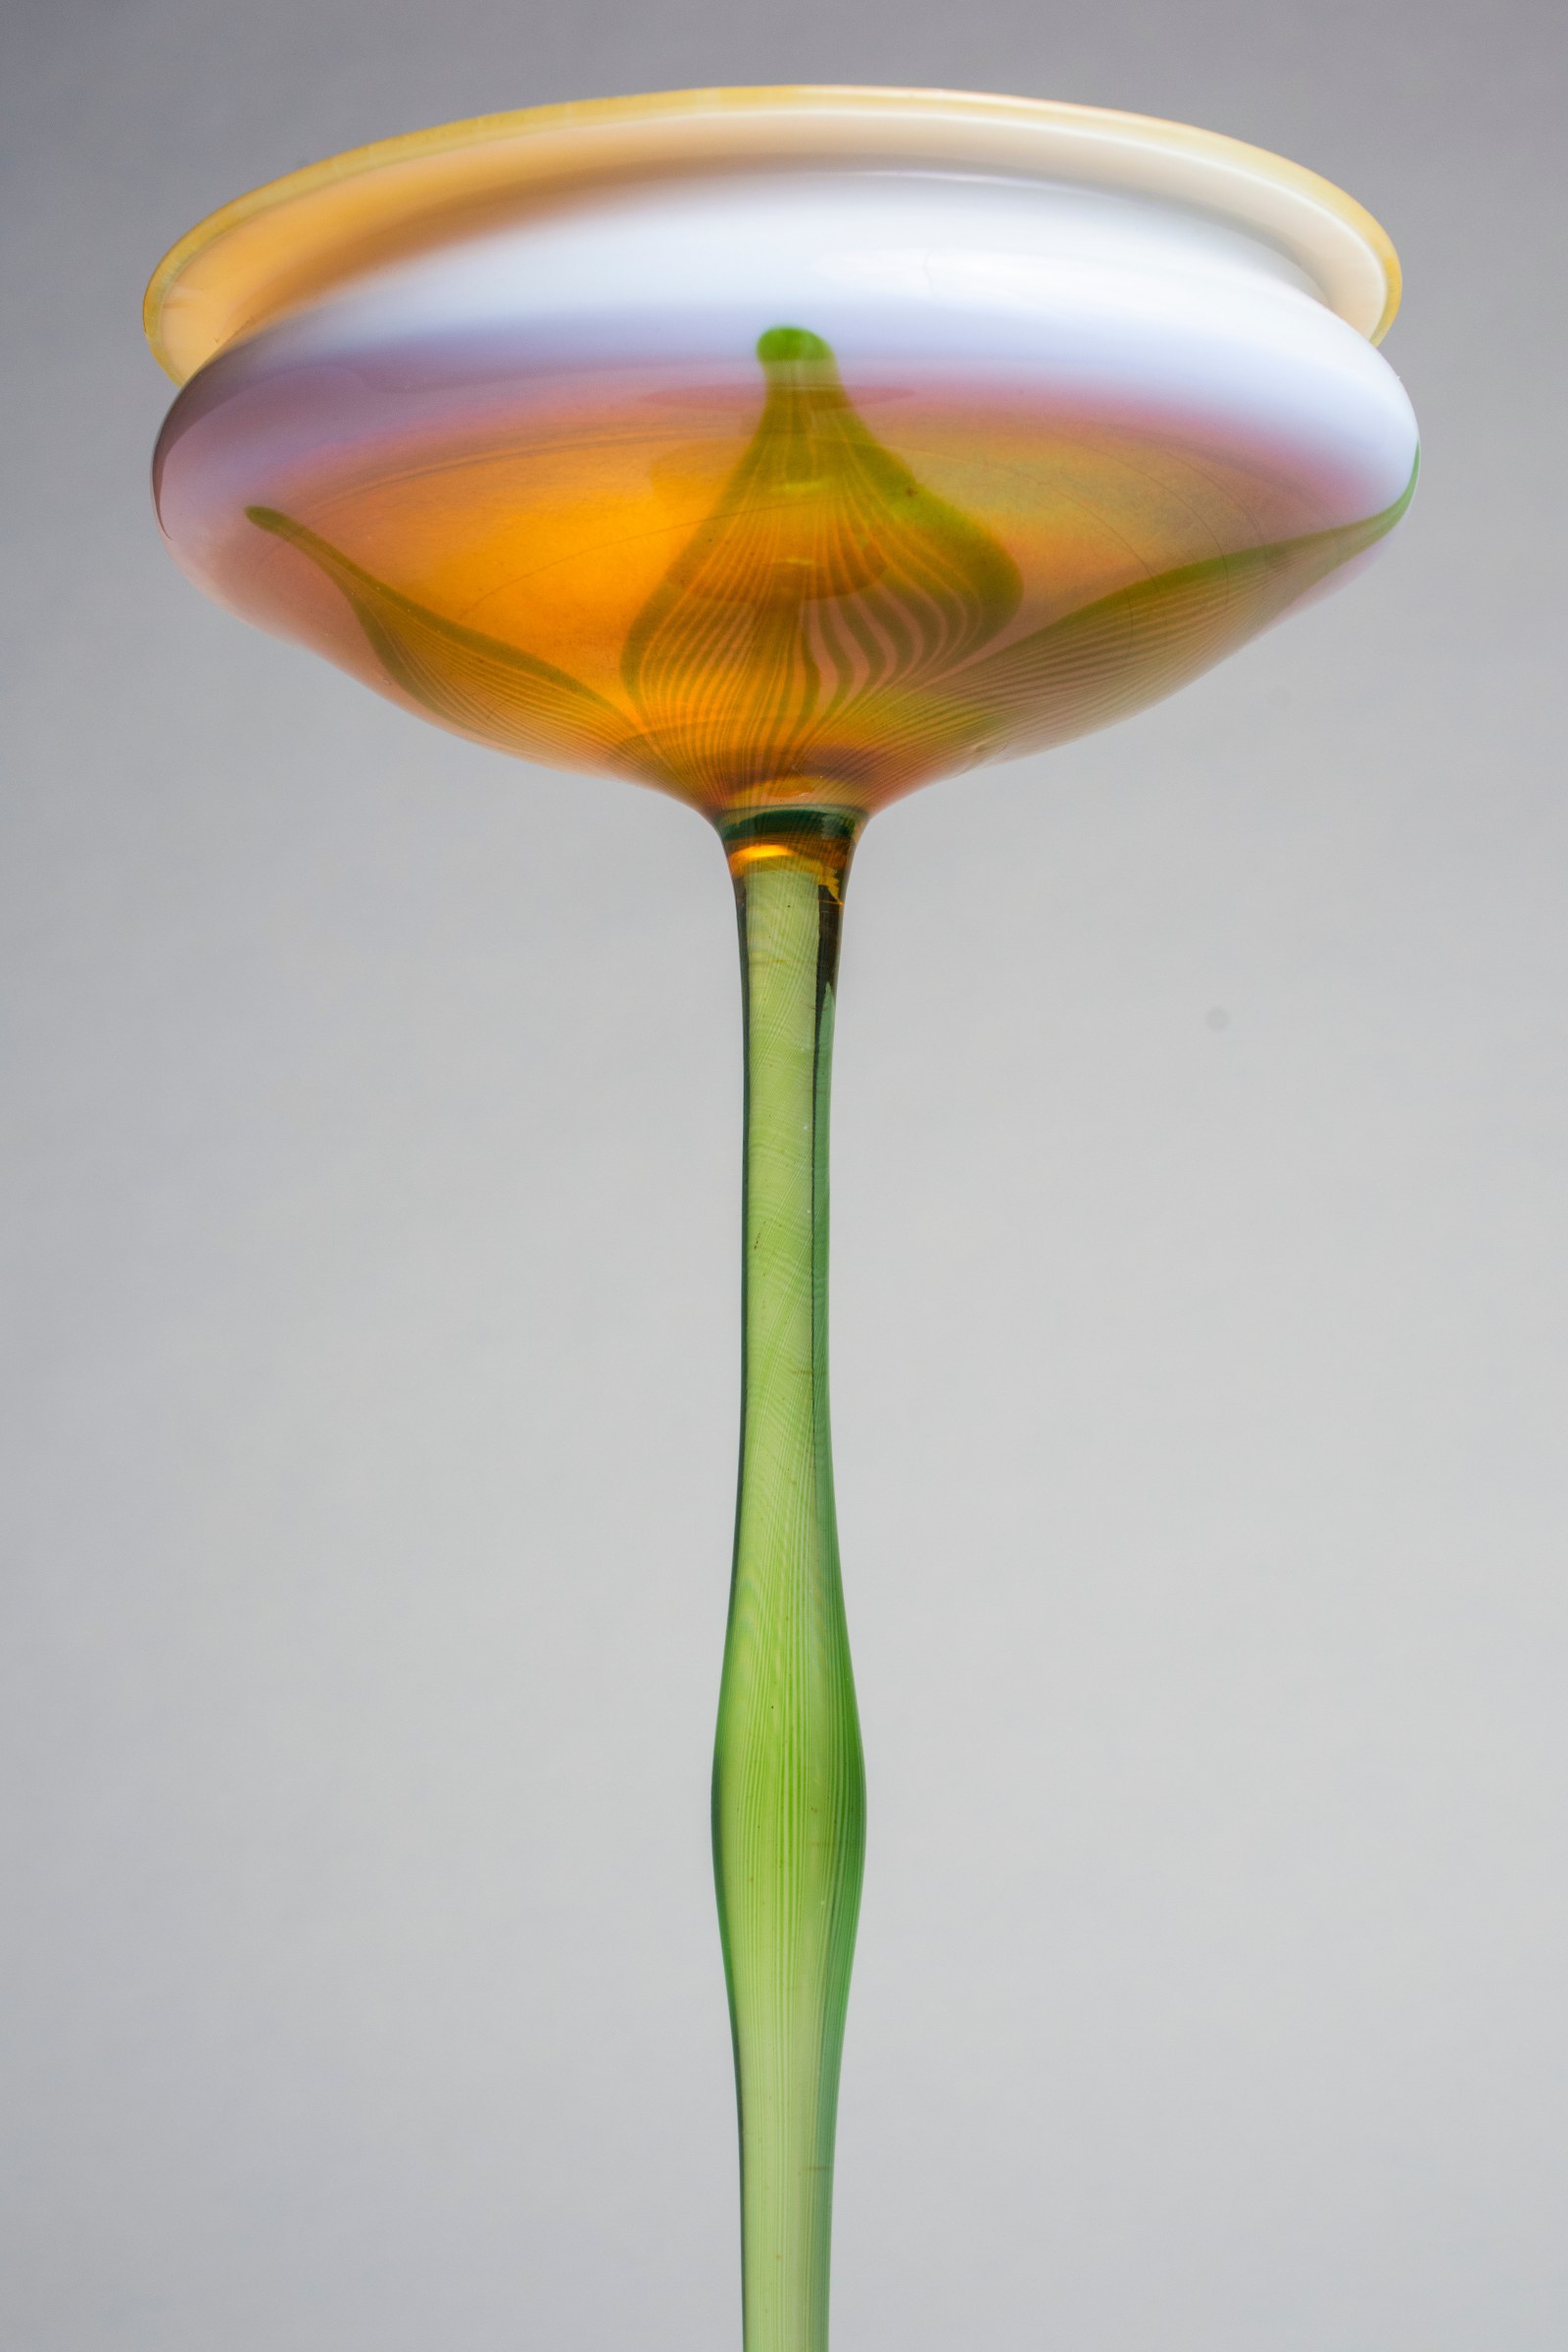 a detail of the tiffany favrile glass flower form's wide mouthed &quot;flower&quot; cup, showing the thin glass stem's striations and the leaf decoration